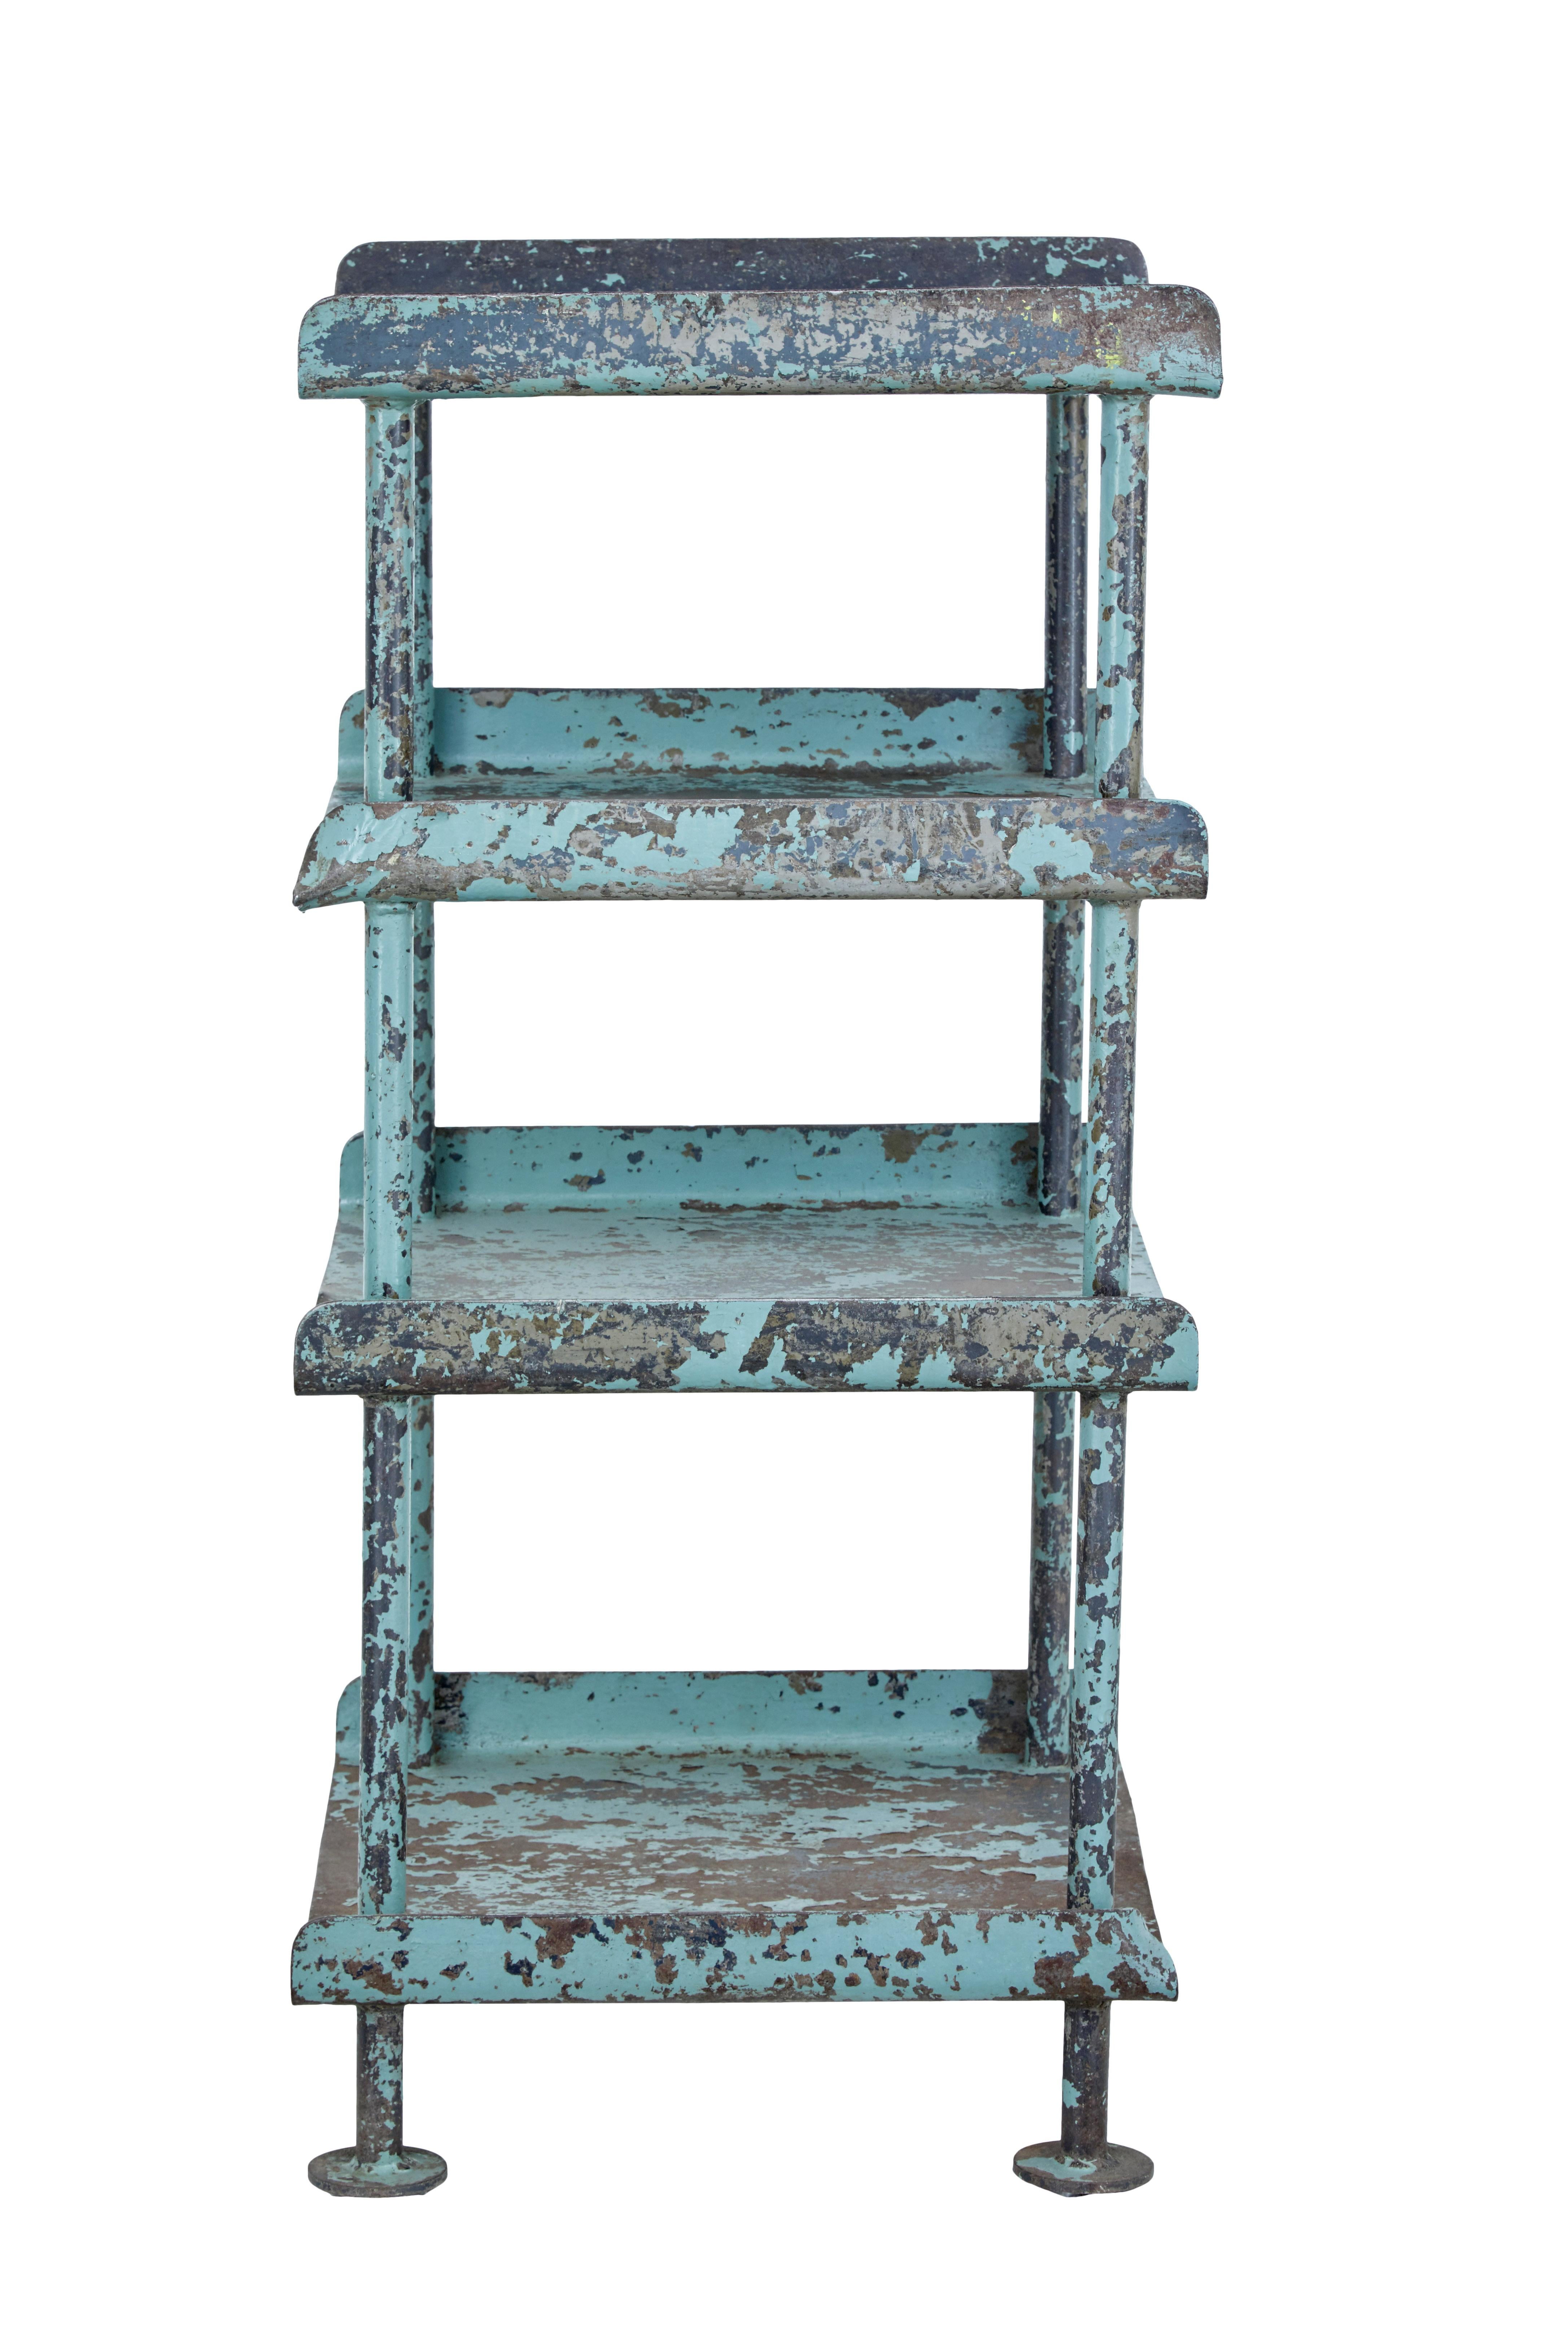 1920's Industrial Painted Shelving Unit In Distressed Condition In Debenham, Suffolk